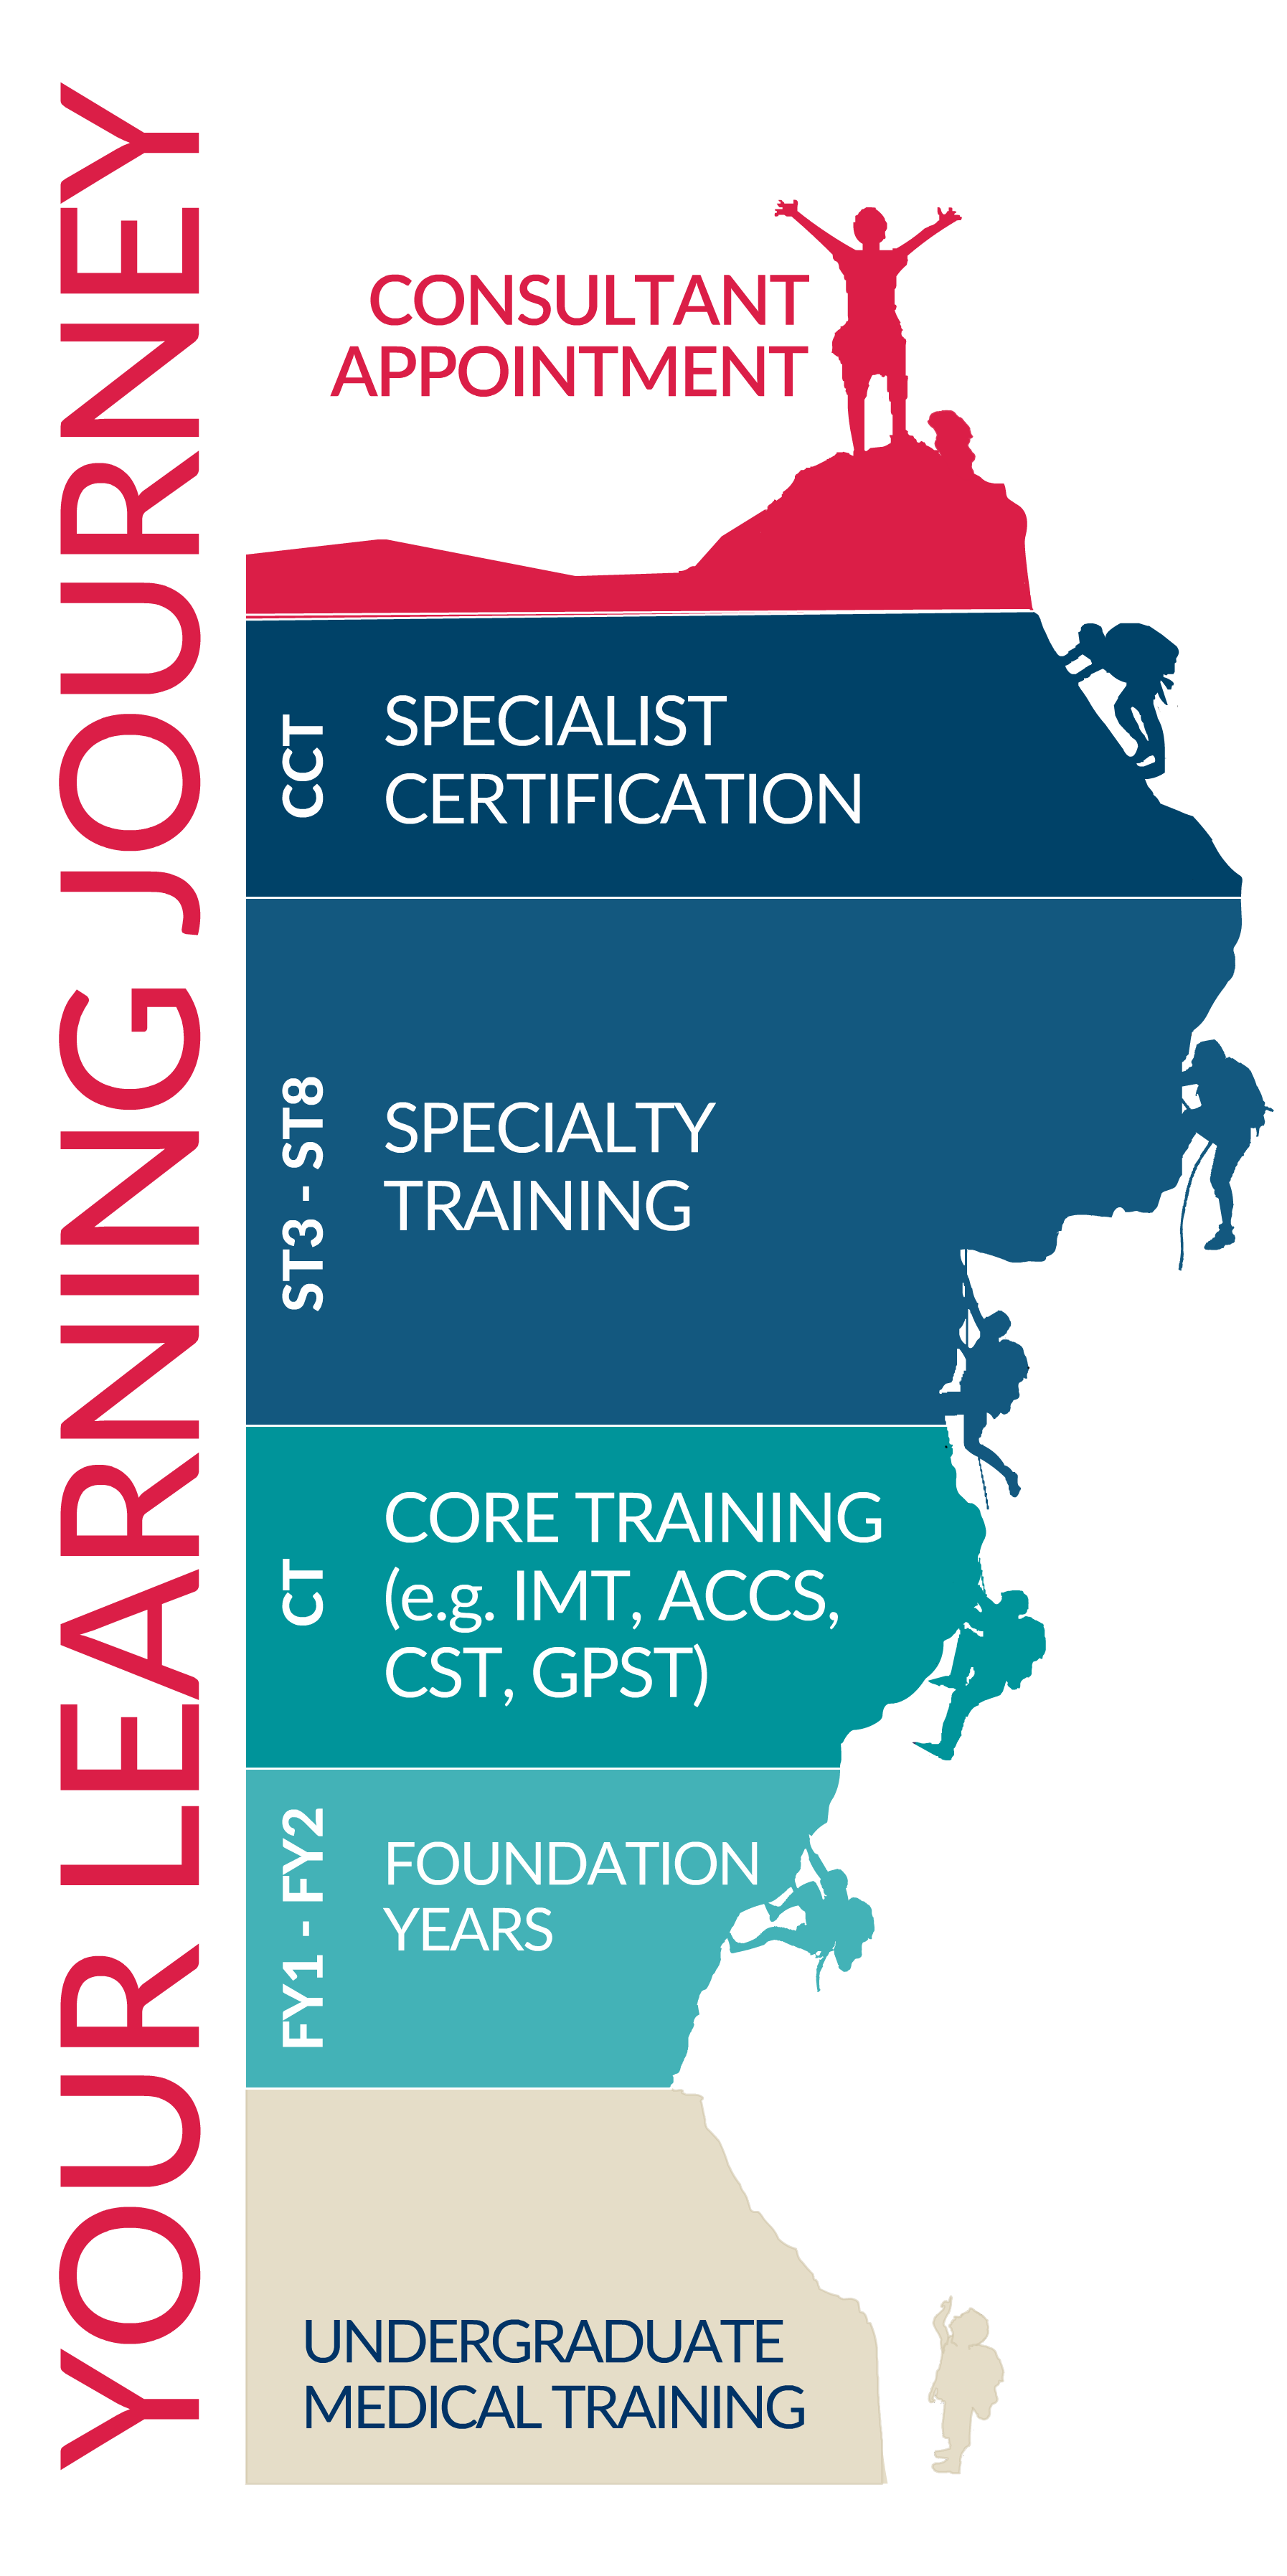 A graphic to show the medical education training pathway